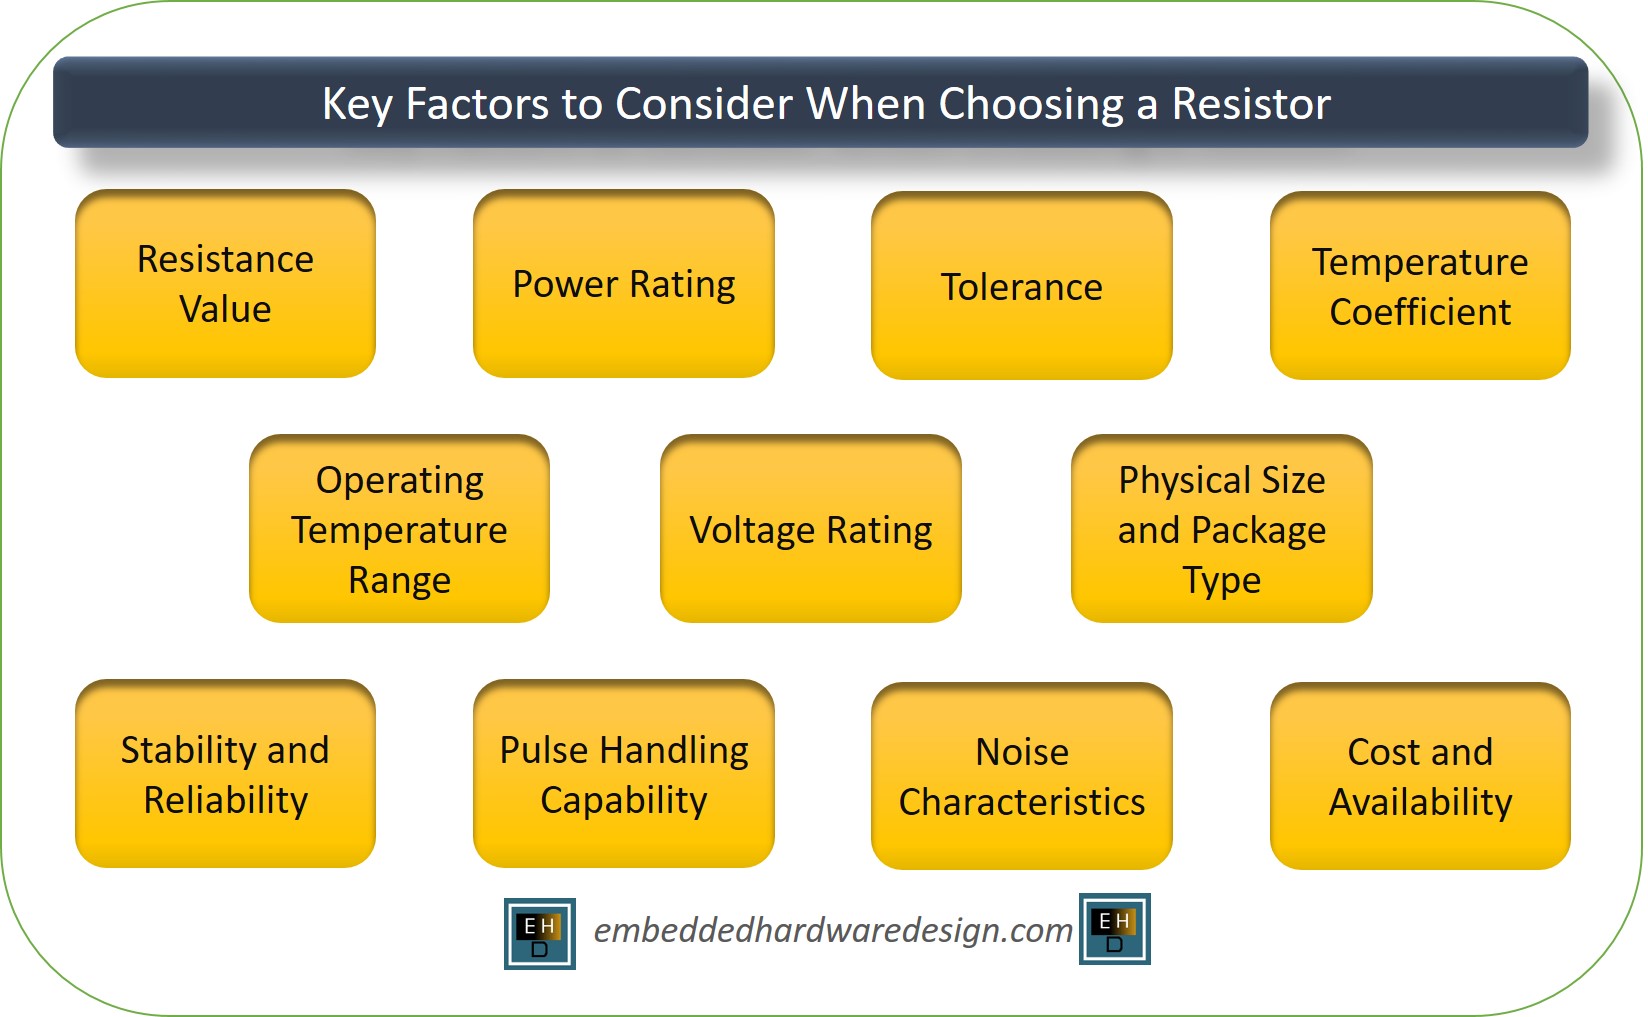 Key Factor to consider resistor for your design